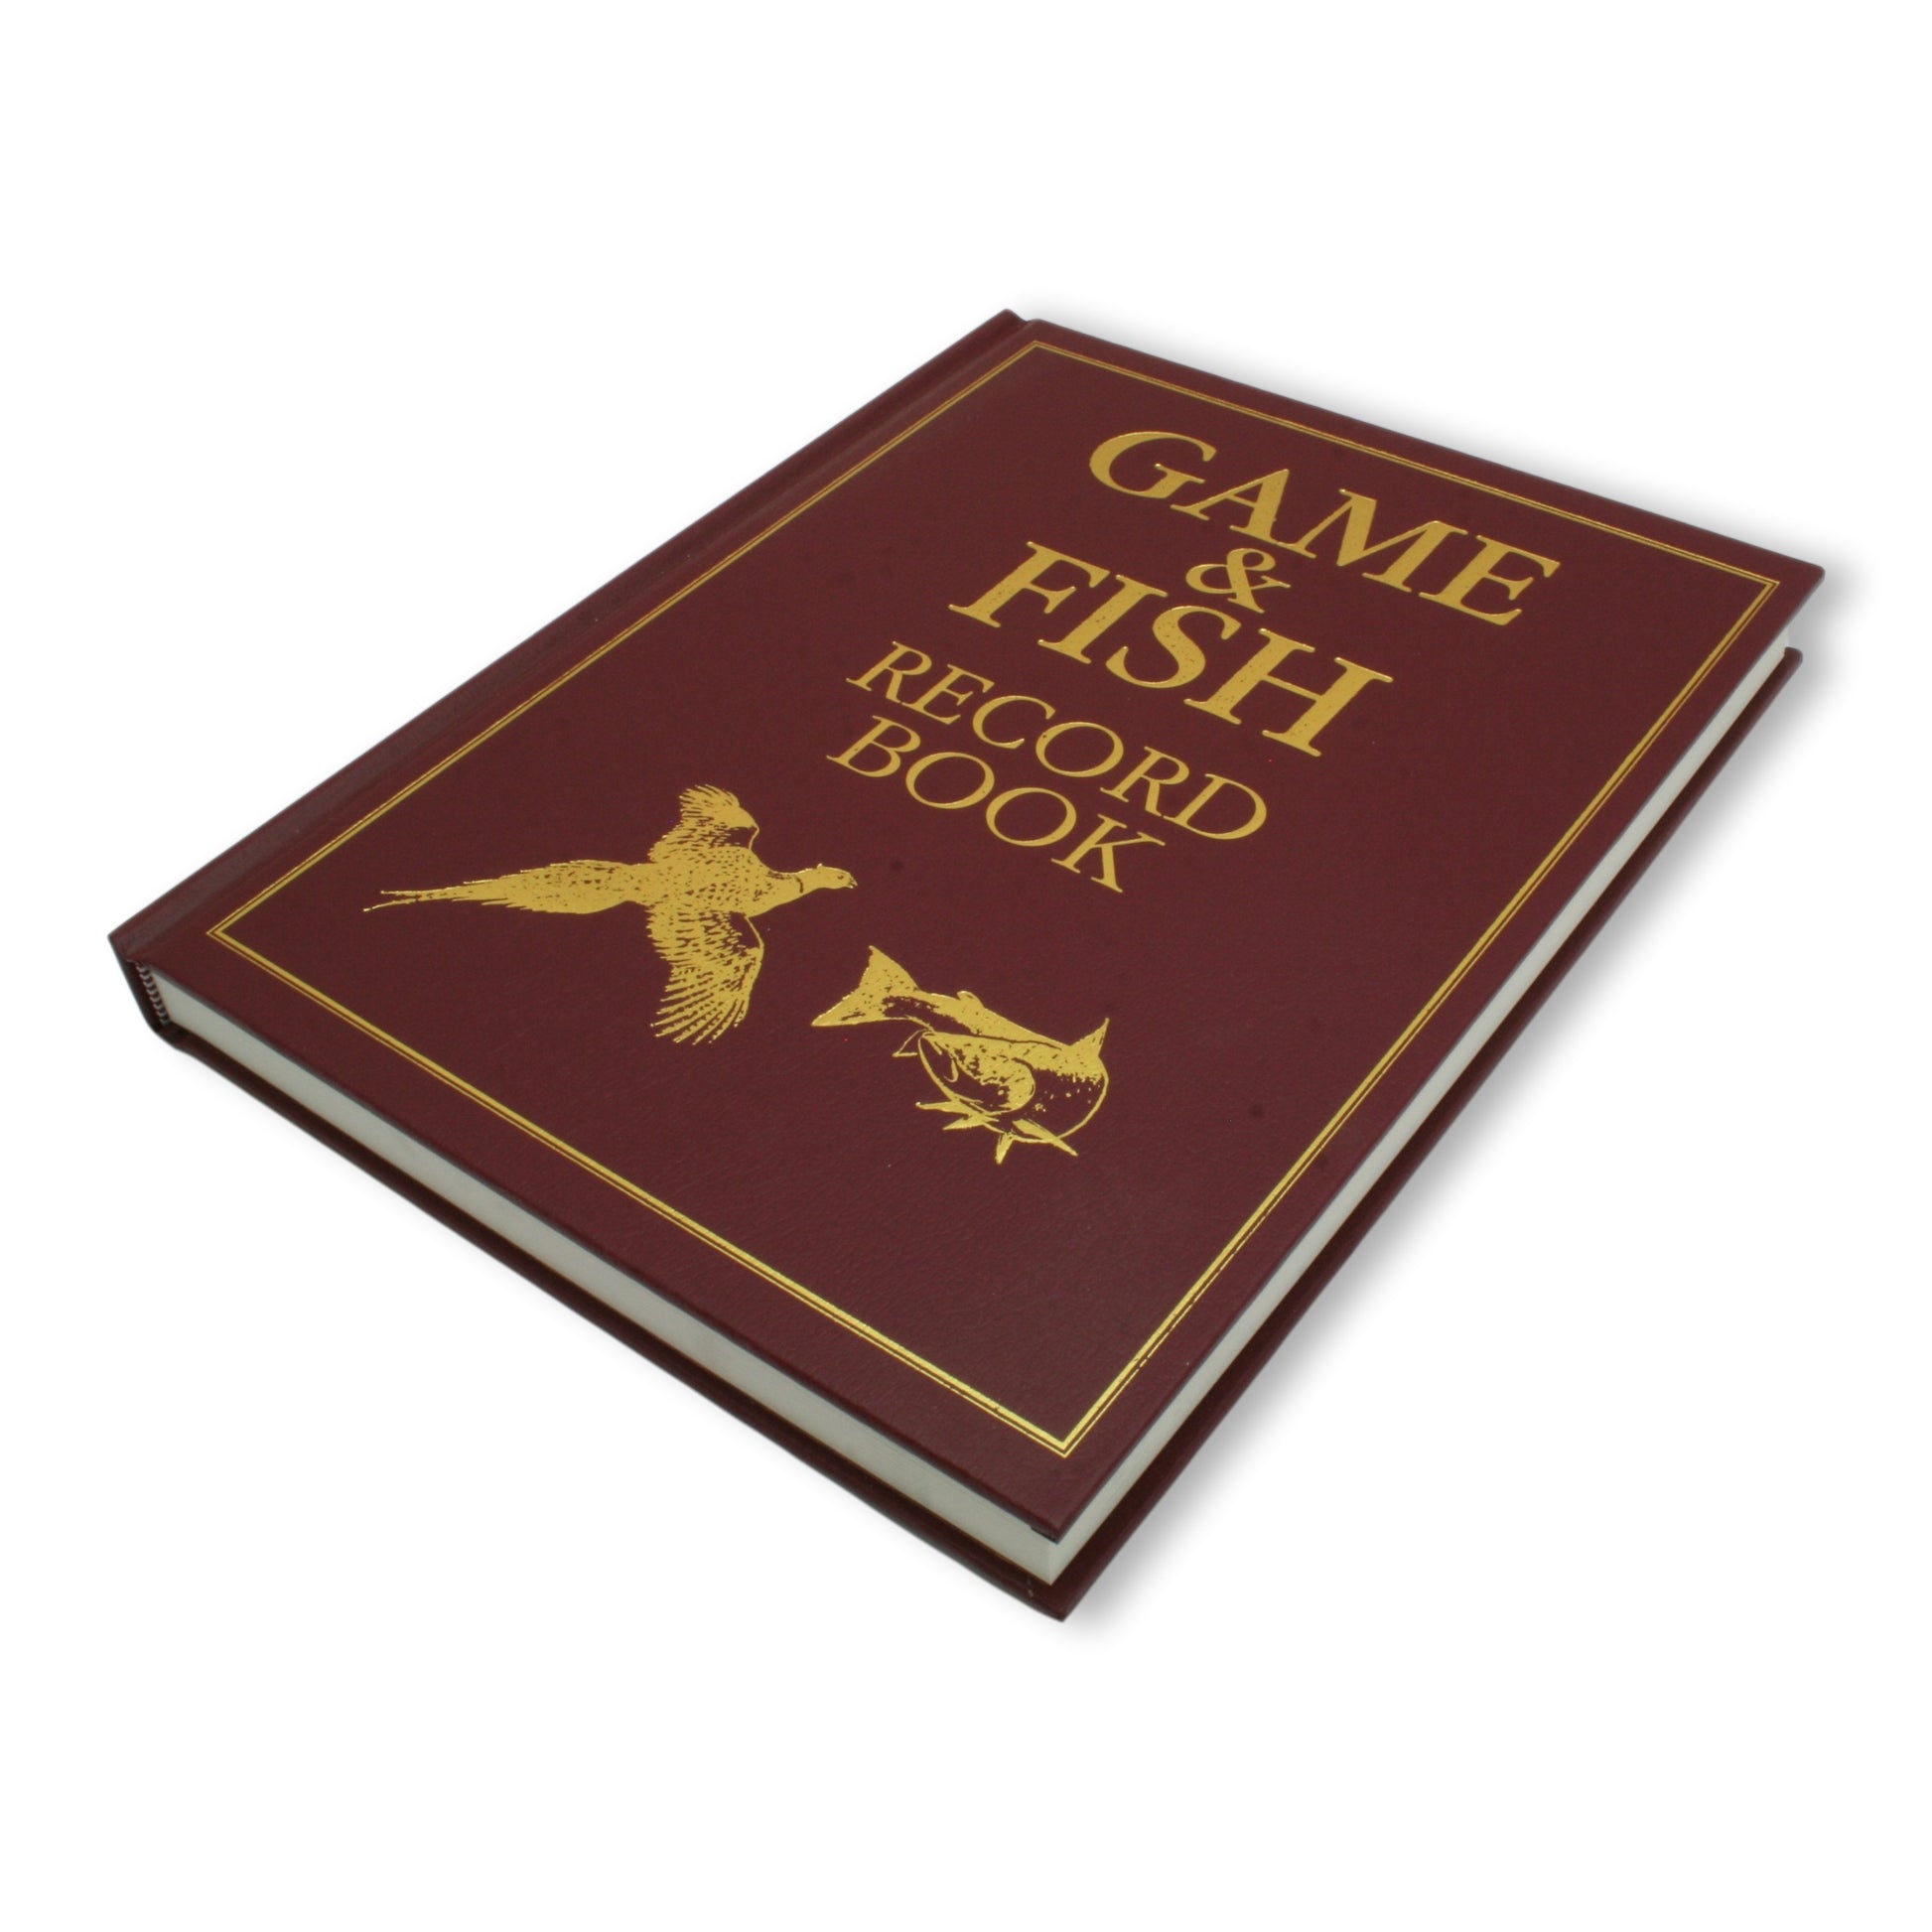 Game and fish record book